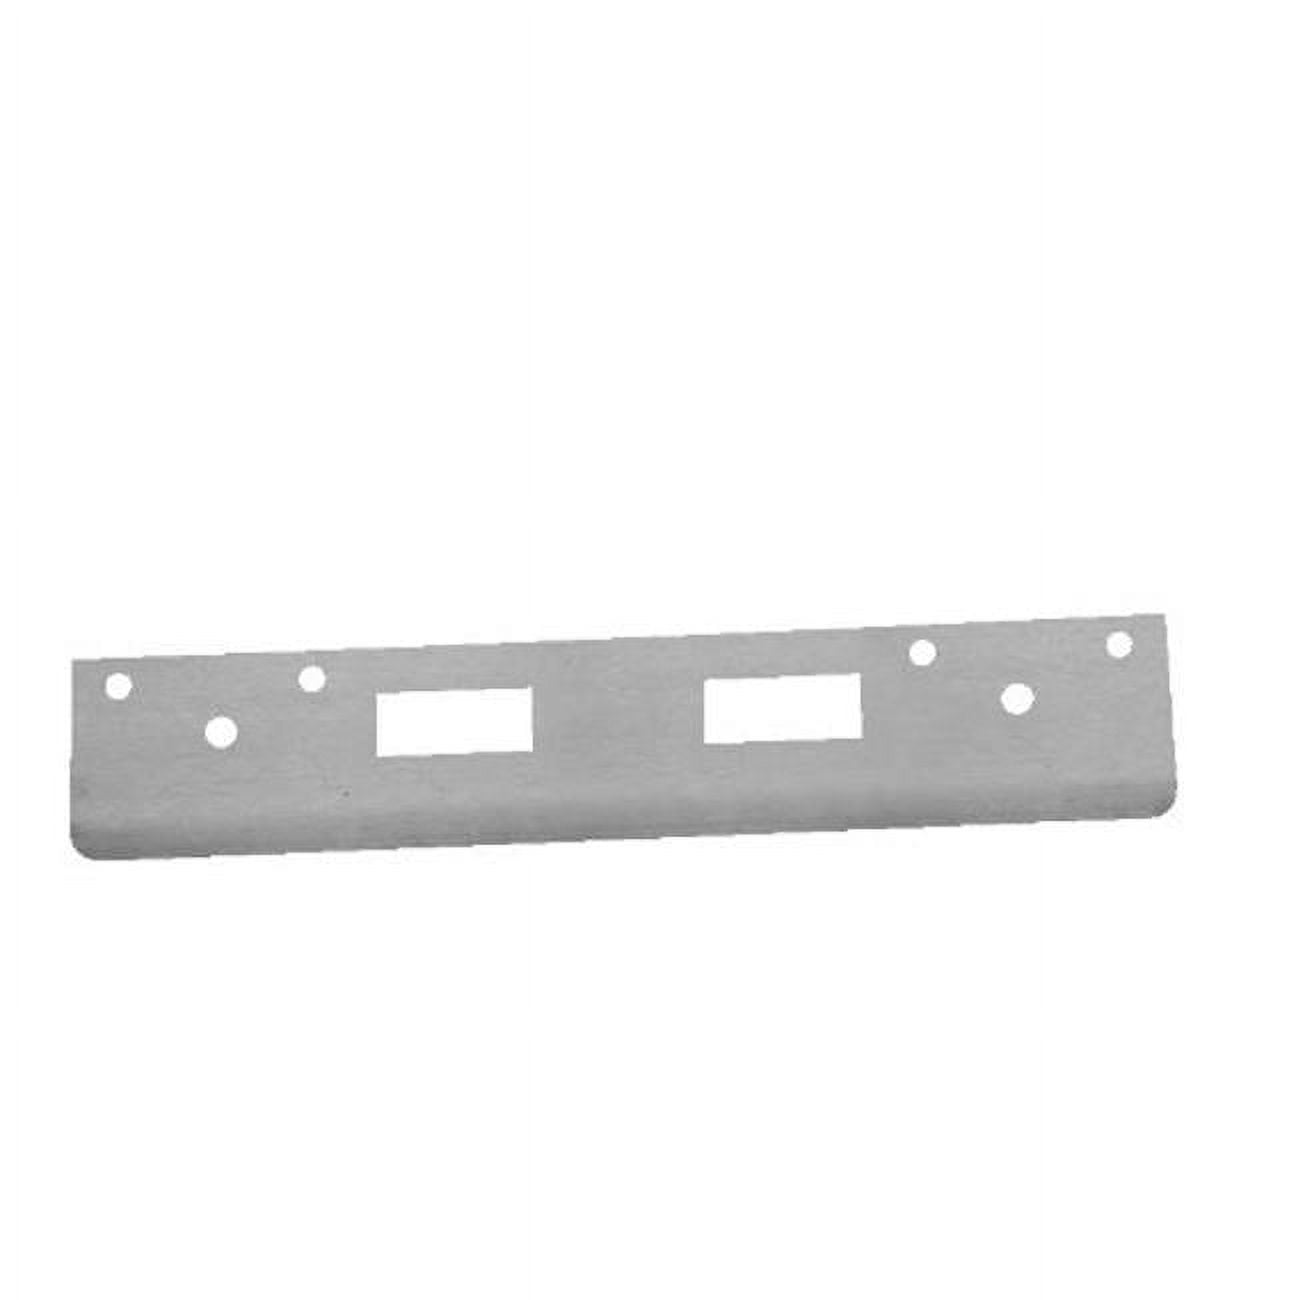 FL 212N6-SL 12 in. Full Lip High Security Strike with 6 in. CTC Latch Holes, Silver Coated -  Don-Jo Manufacturing, FL 212N6 SL